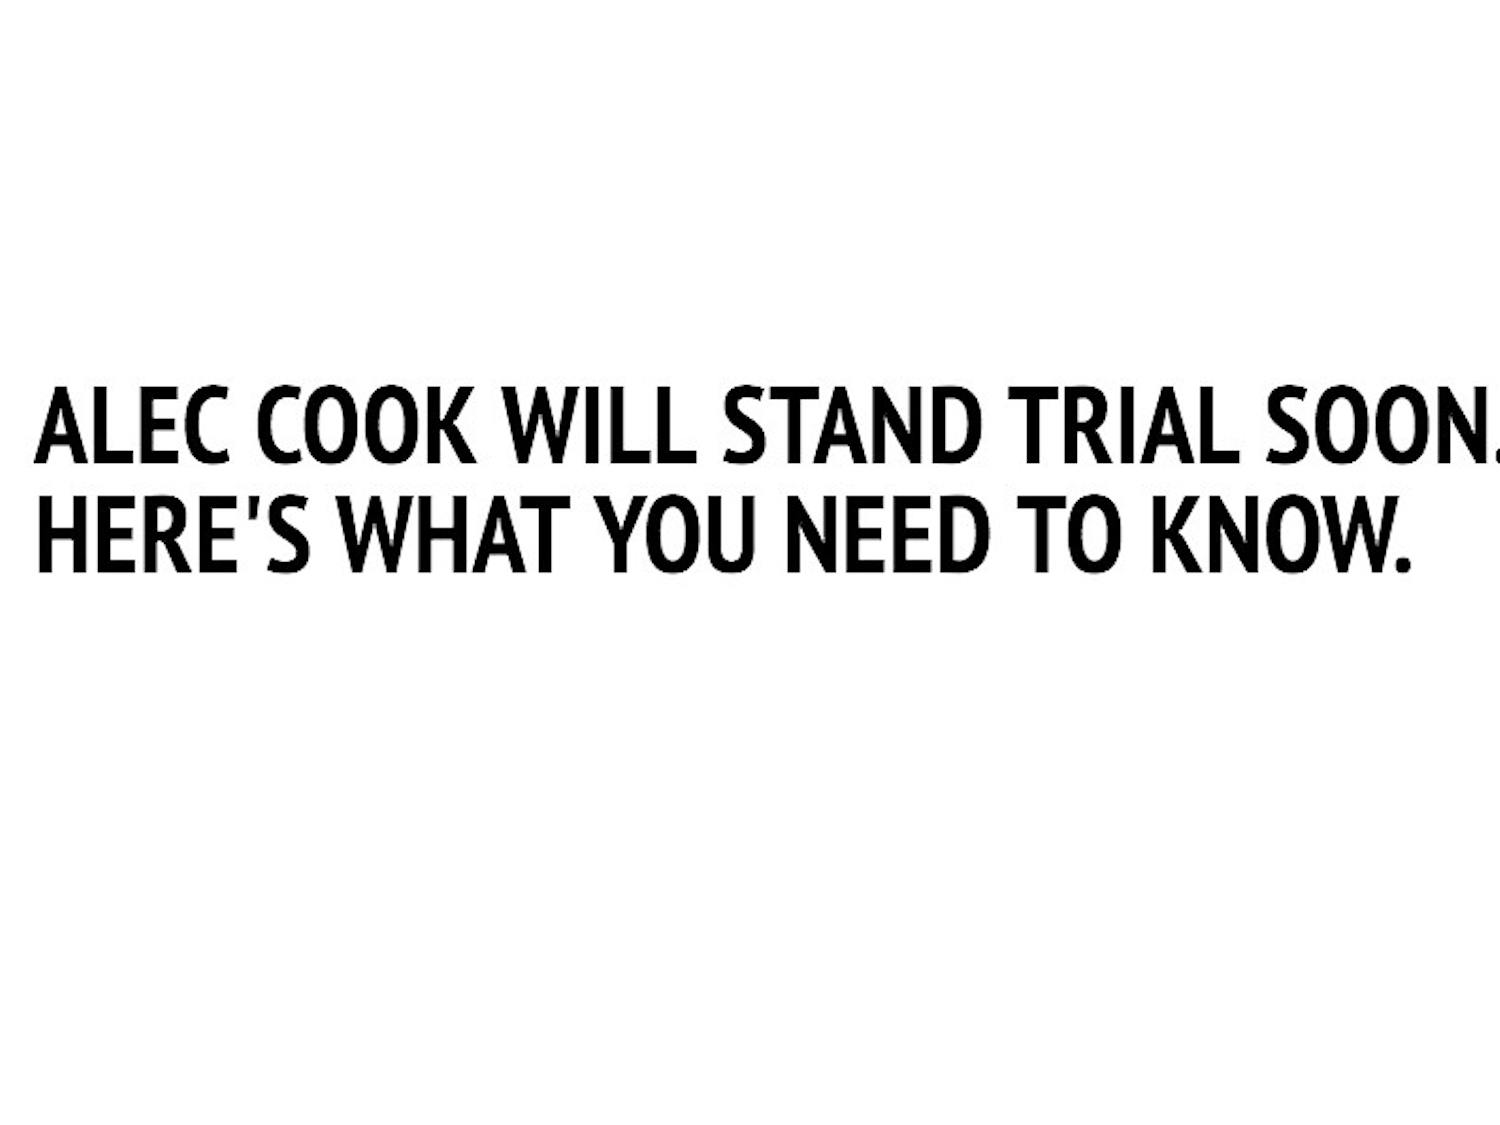 Cook's first of seven trials is set to begin Feb. 26 in Jefferson County.